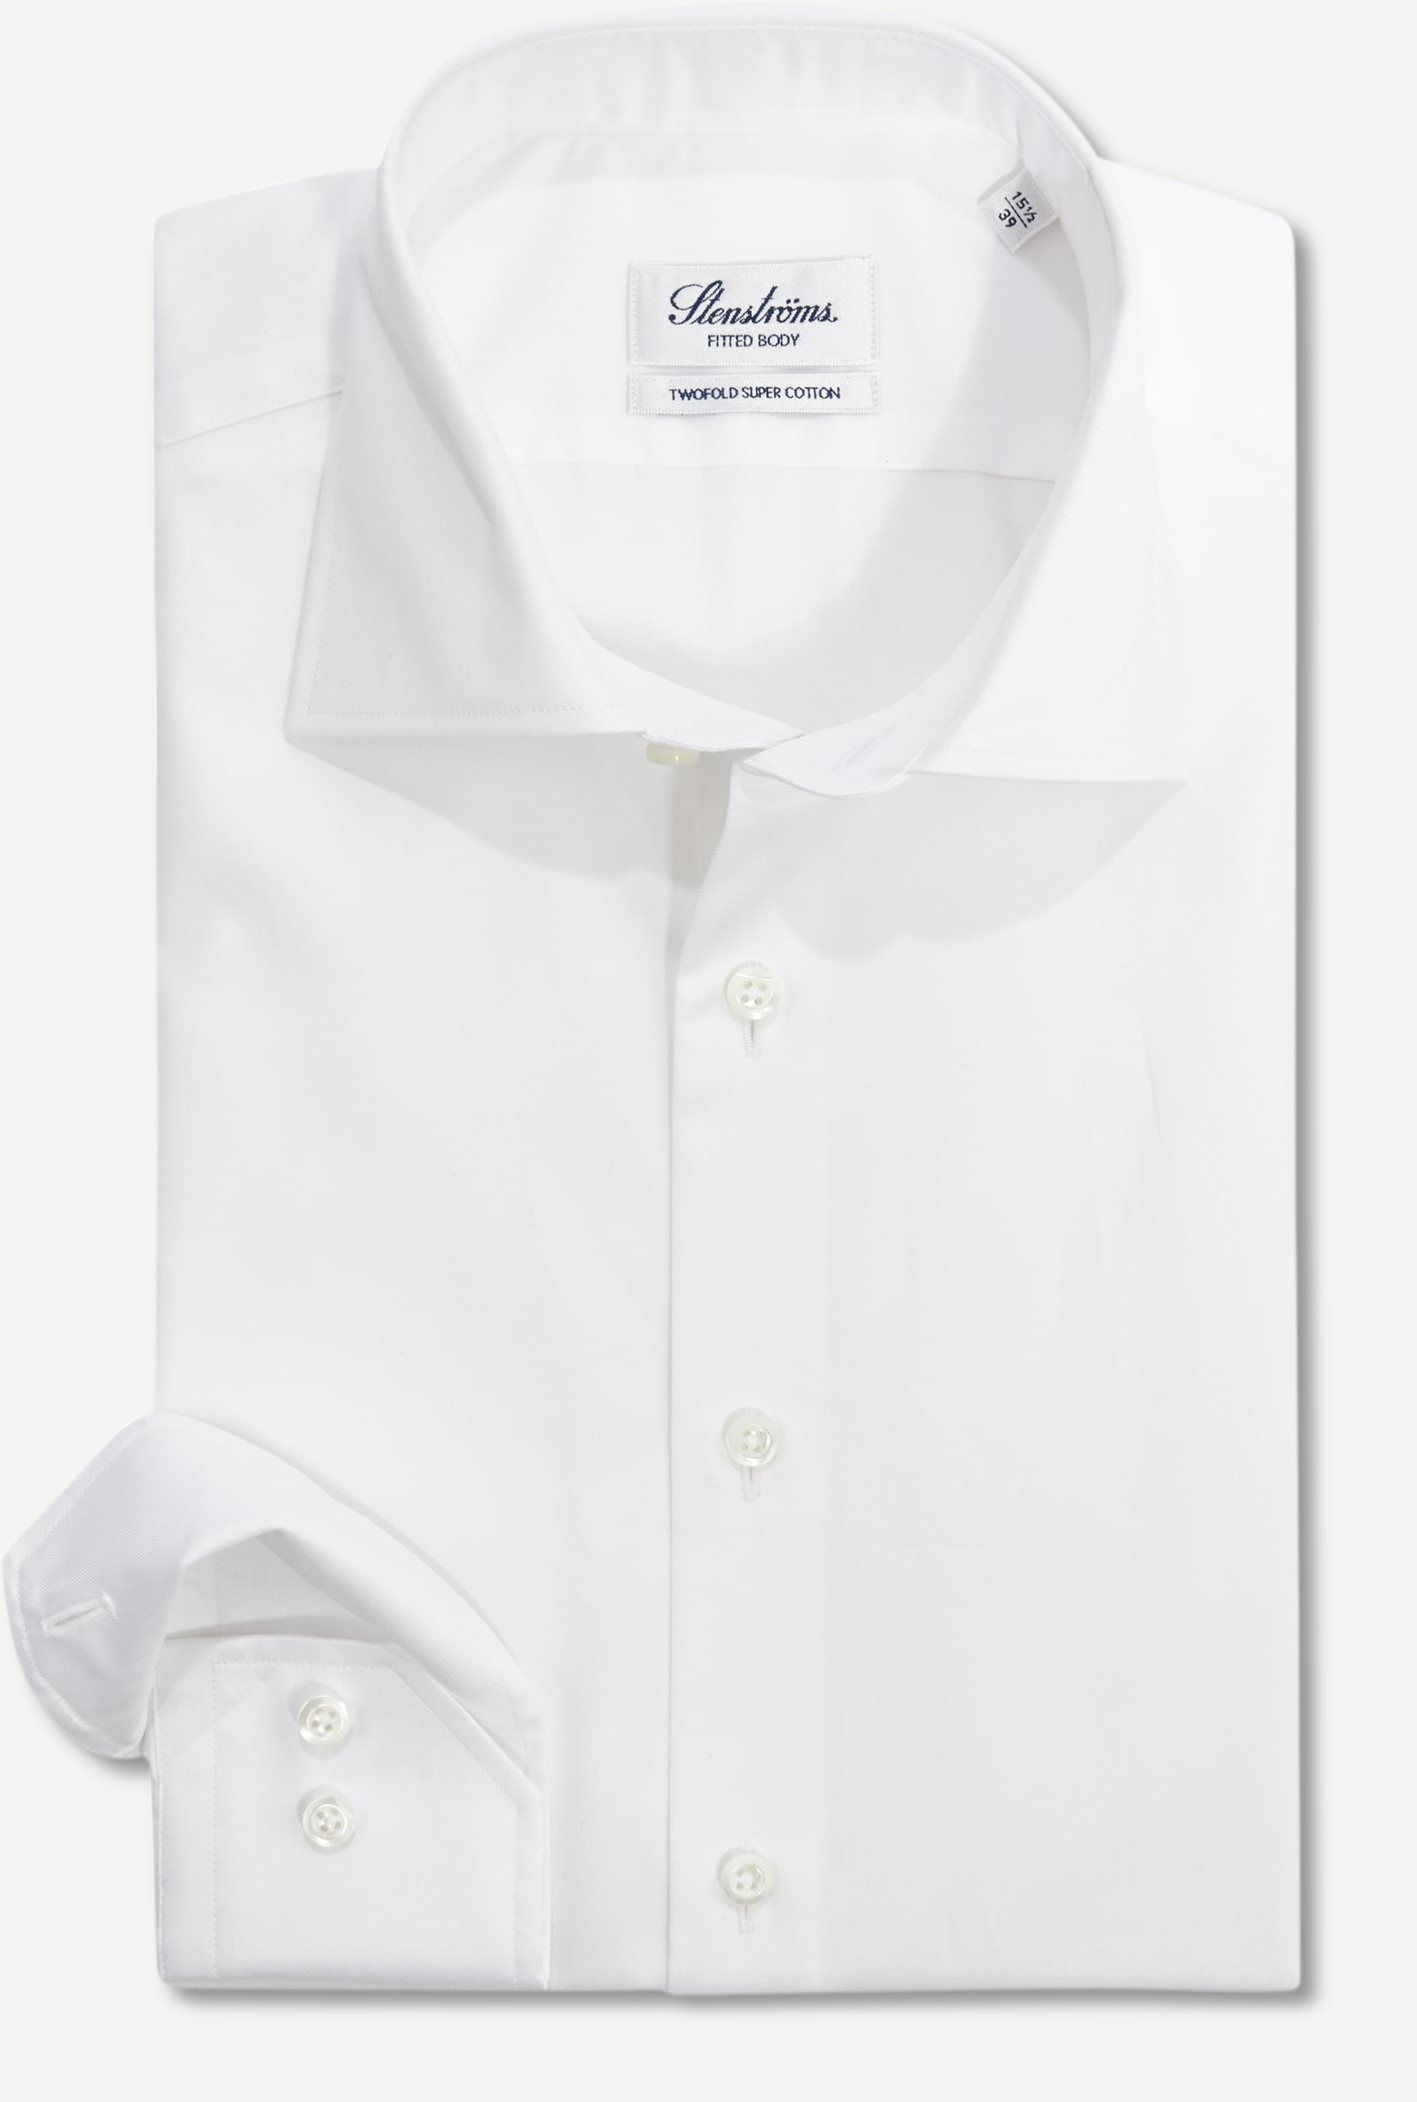 Stenströms Shirts 1467-000/100 FITTED White